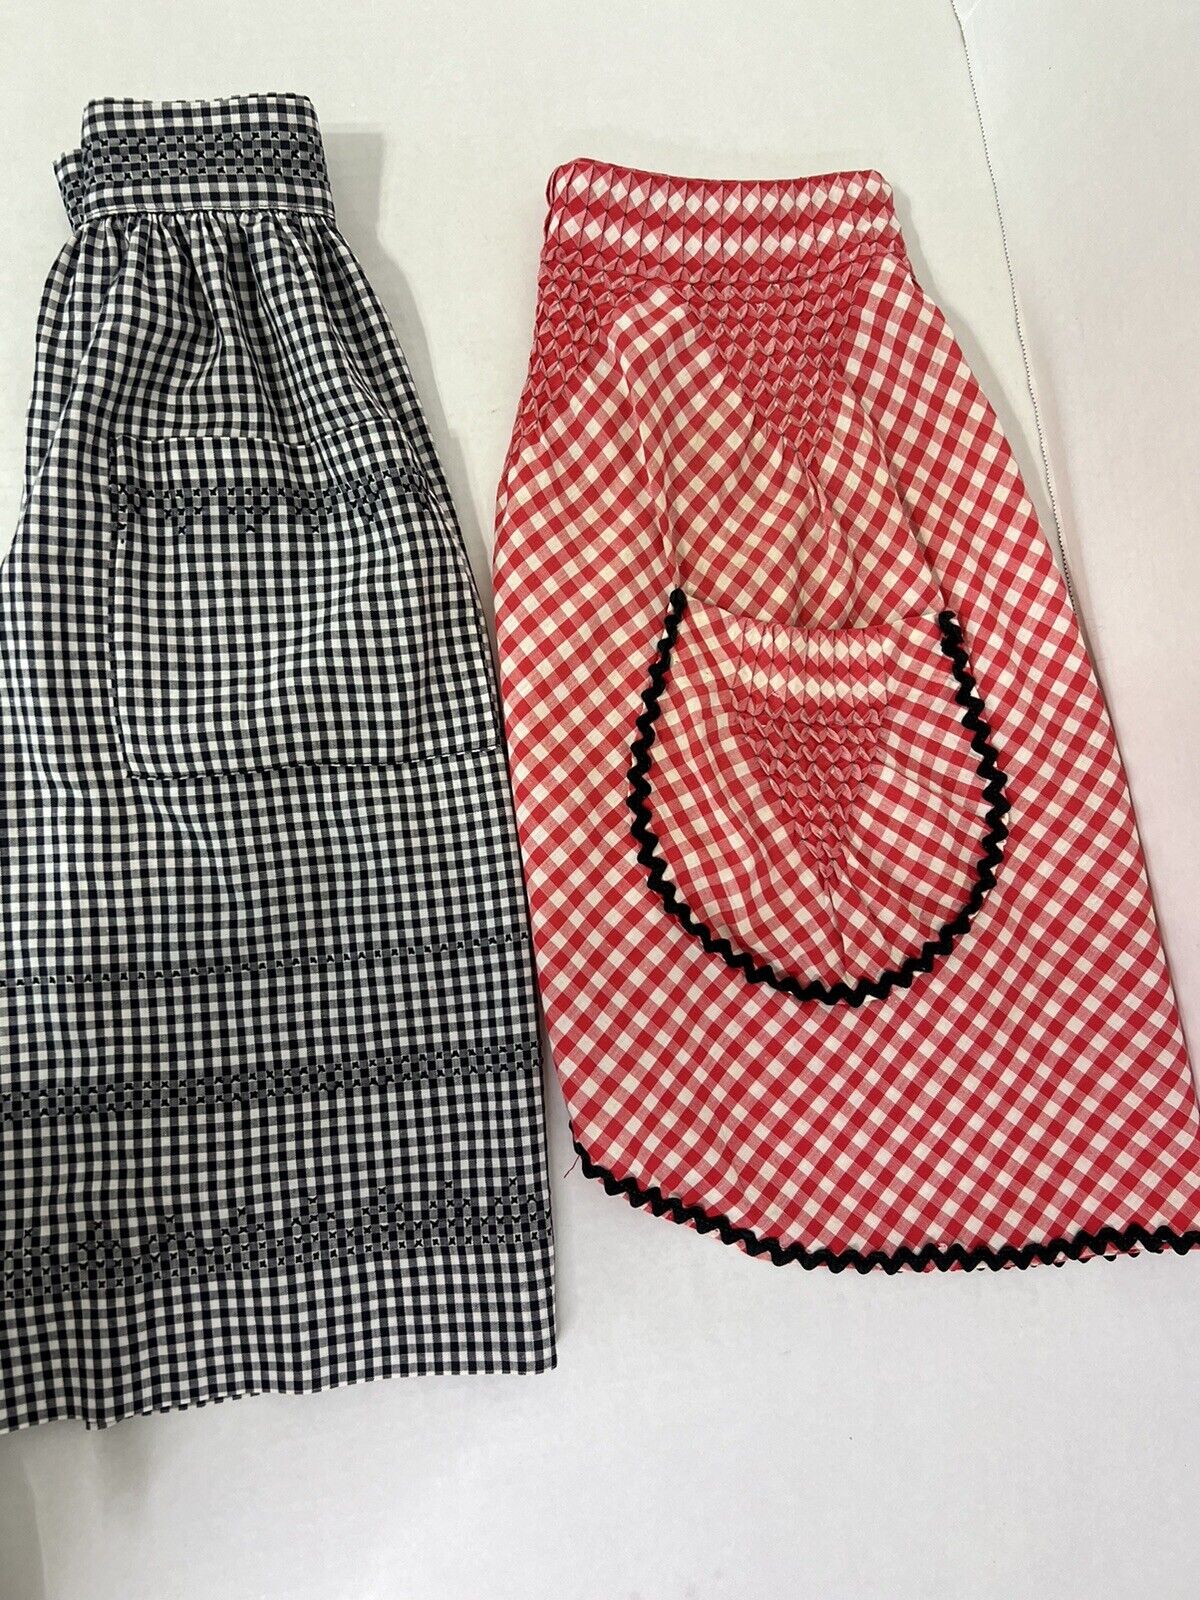 Vintage Homemade 1/2 Aprons Lot of 2 Red Black Gingham Pockets Cross Stitching